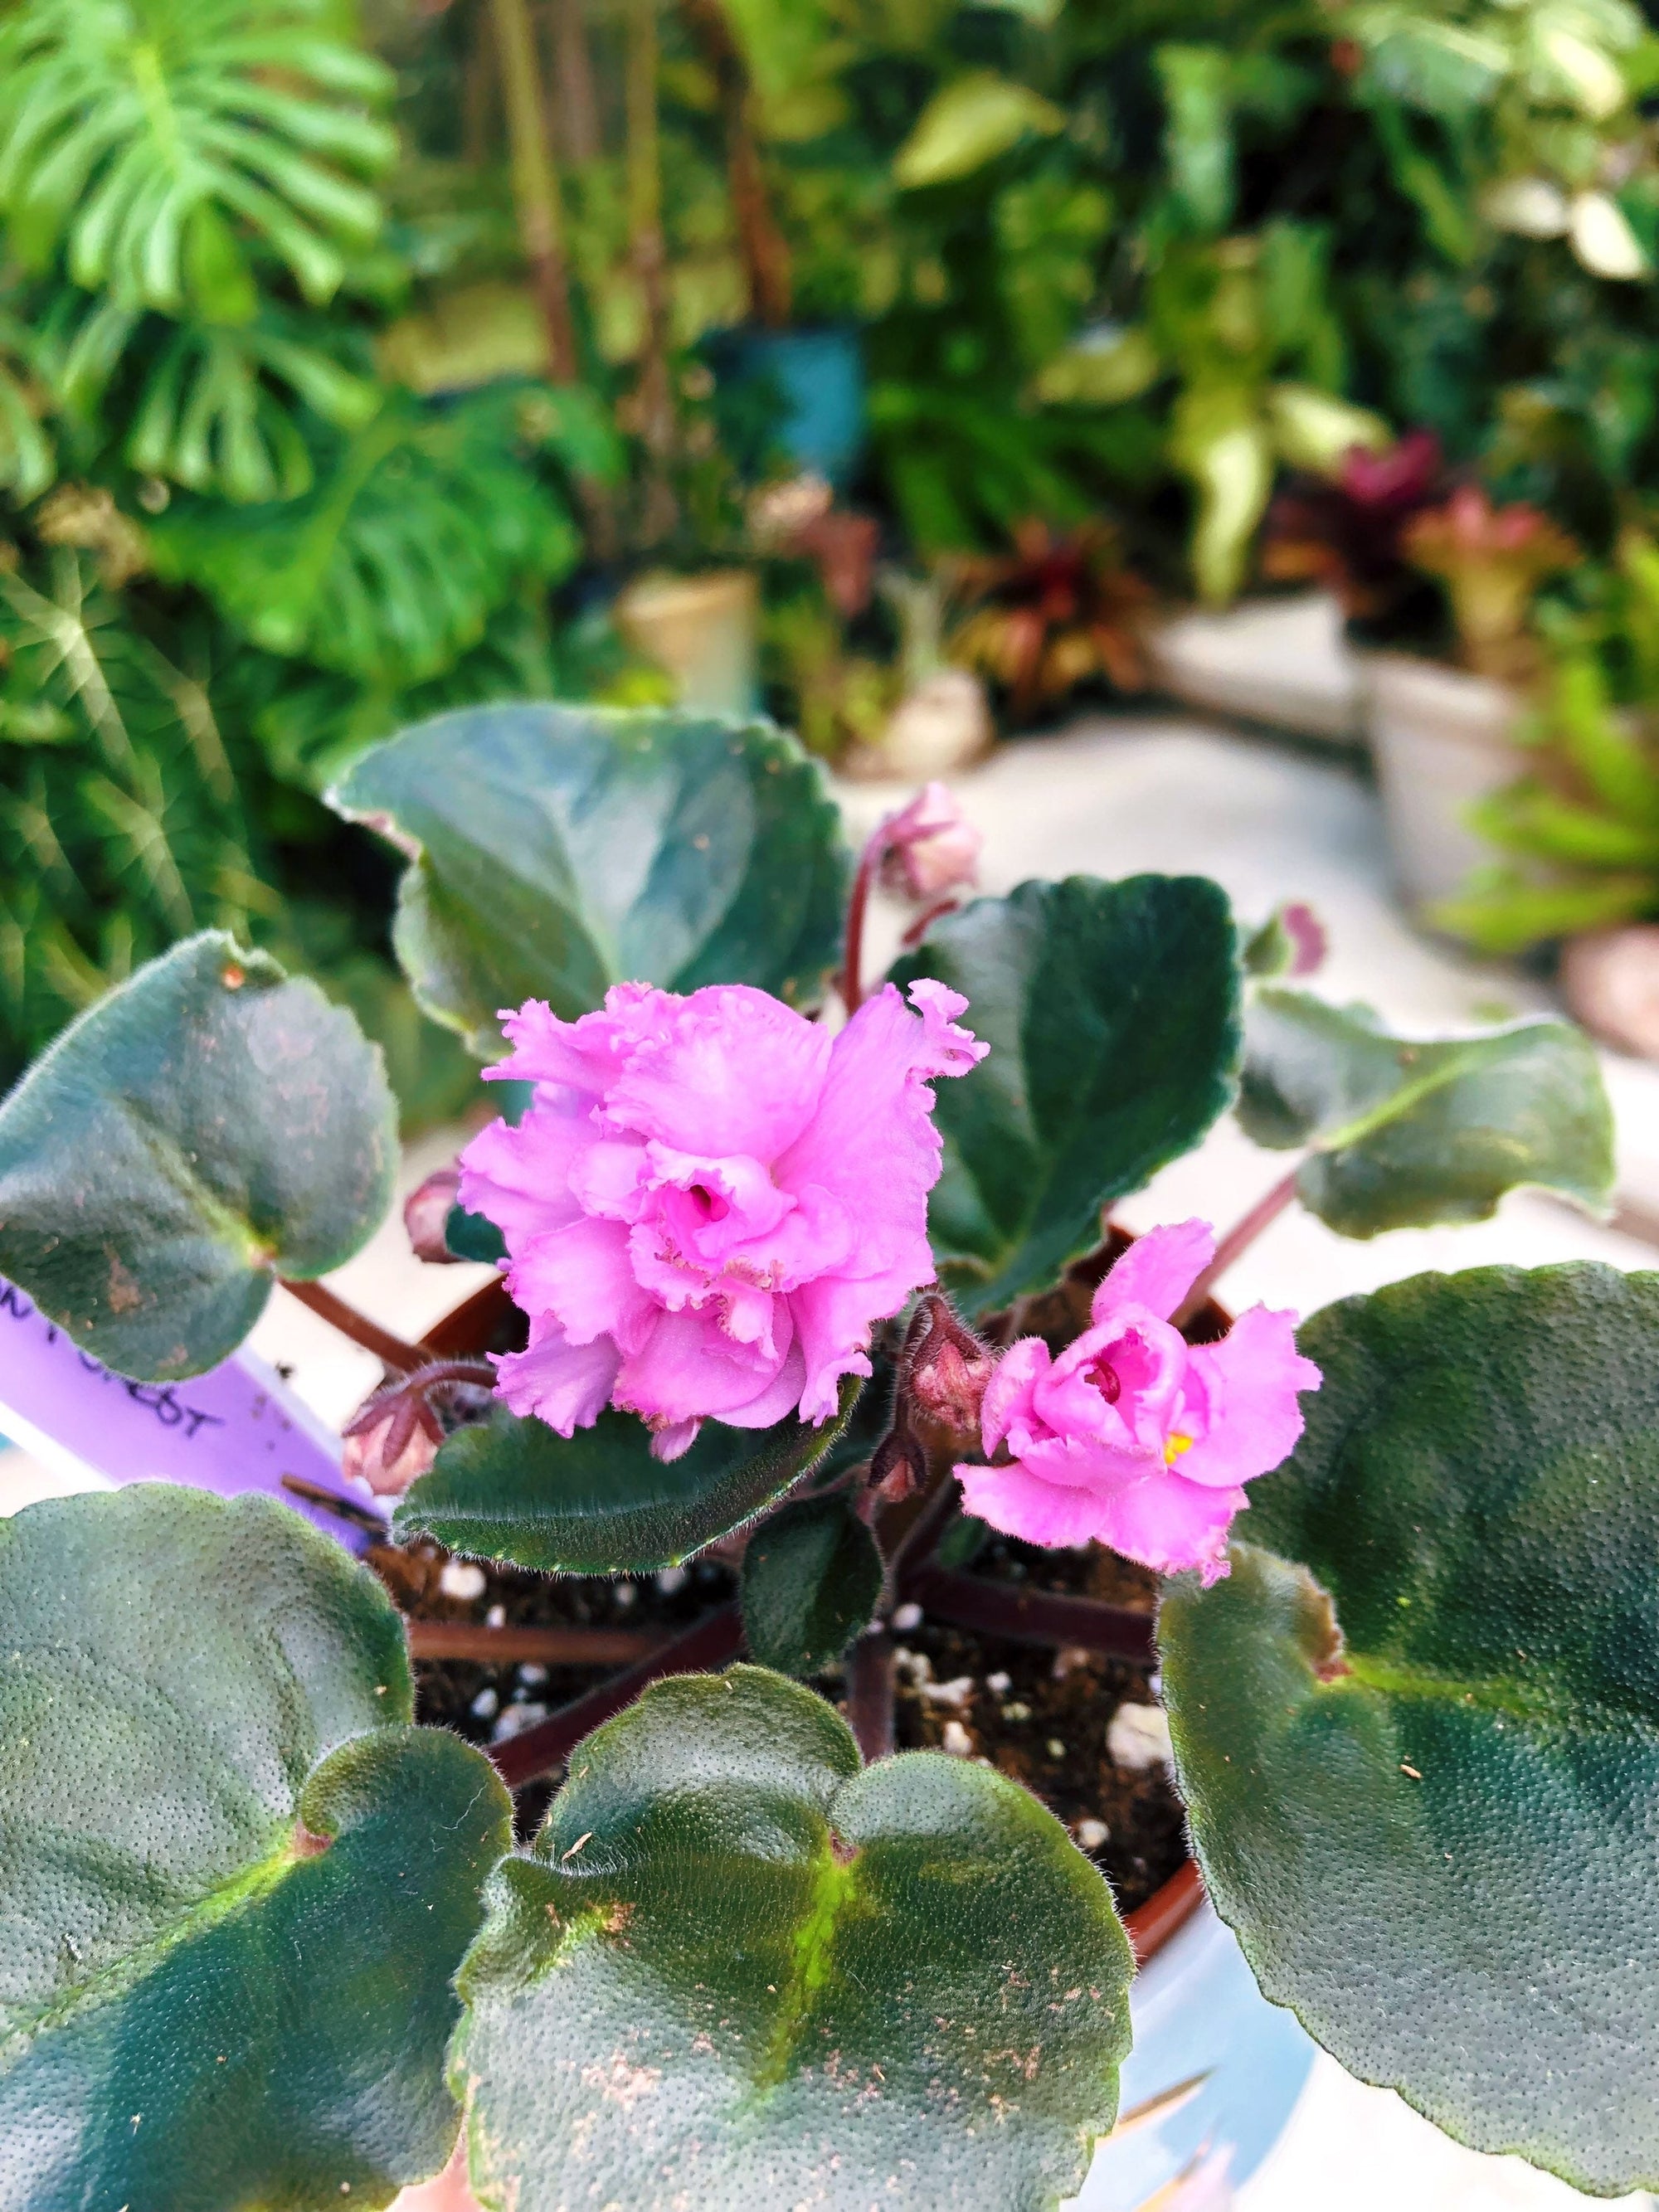 Live house plant variegated bloom African Violet ‘AB Autumn Forest’ garden 4” flower Potted gift